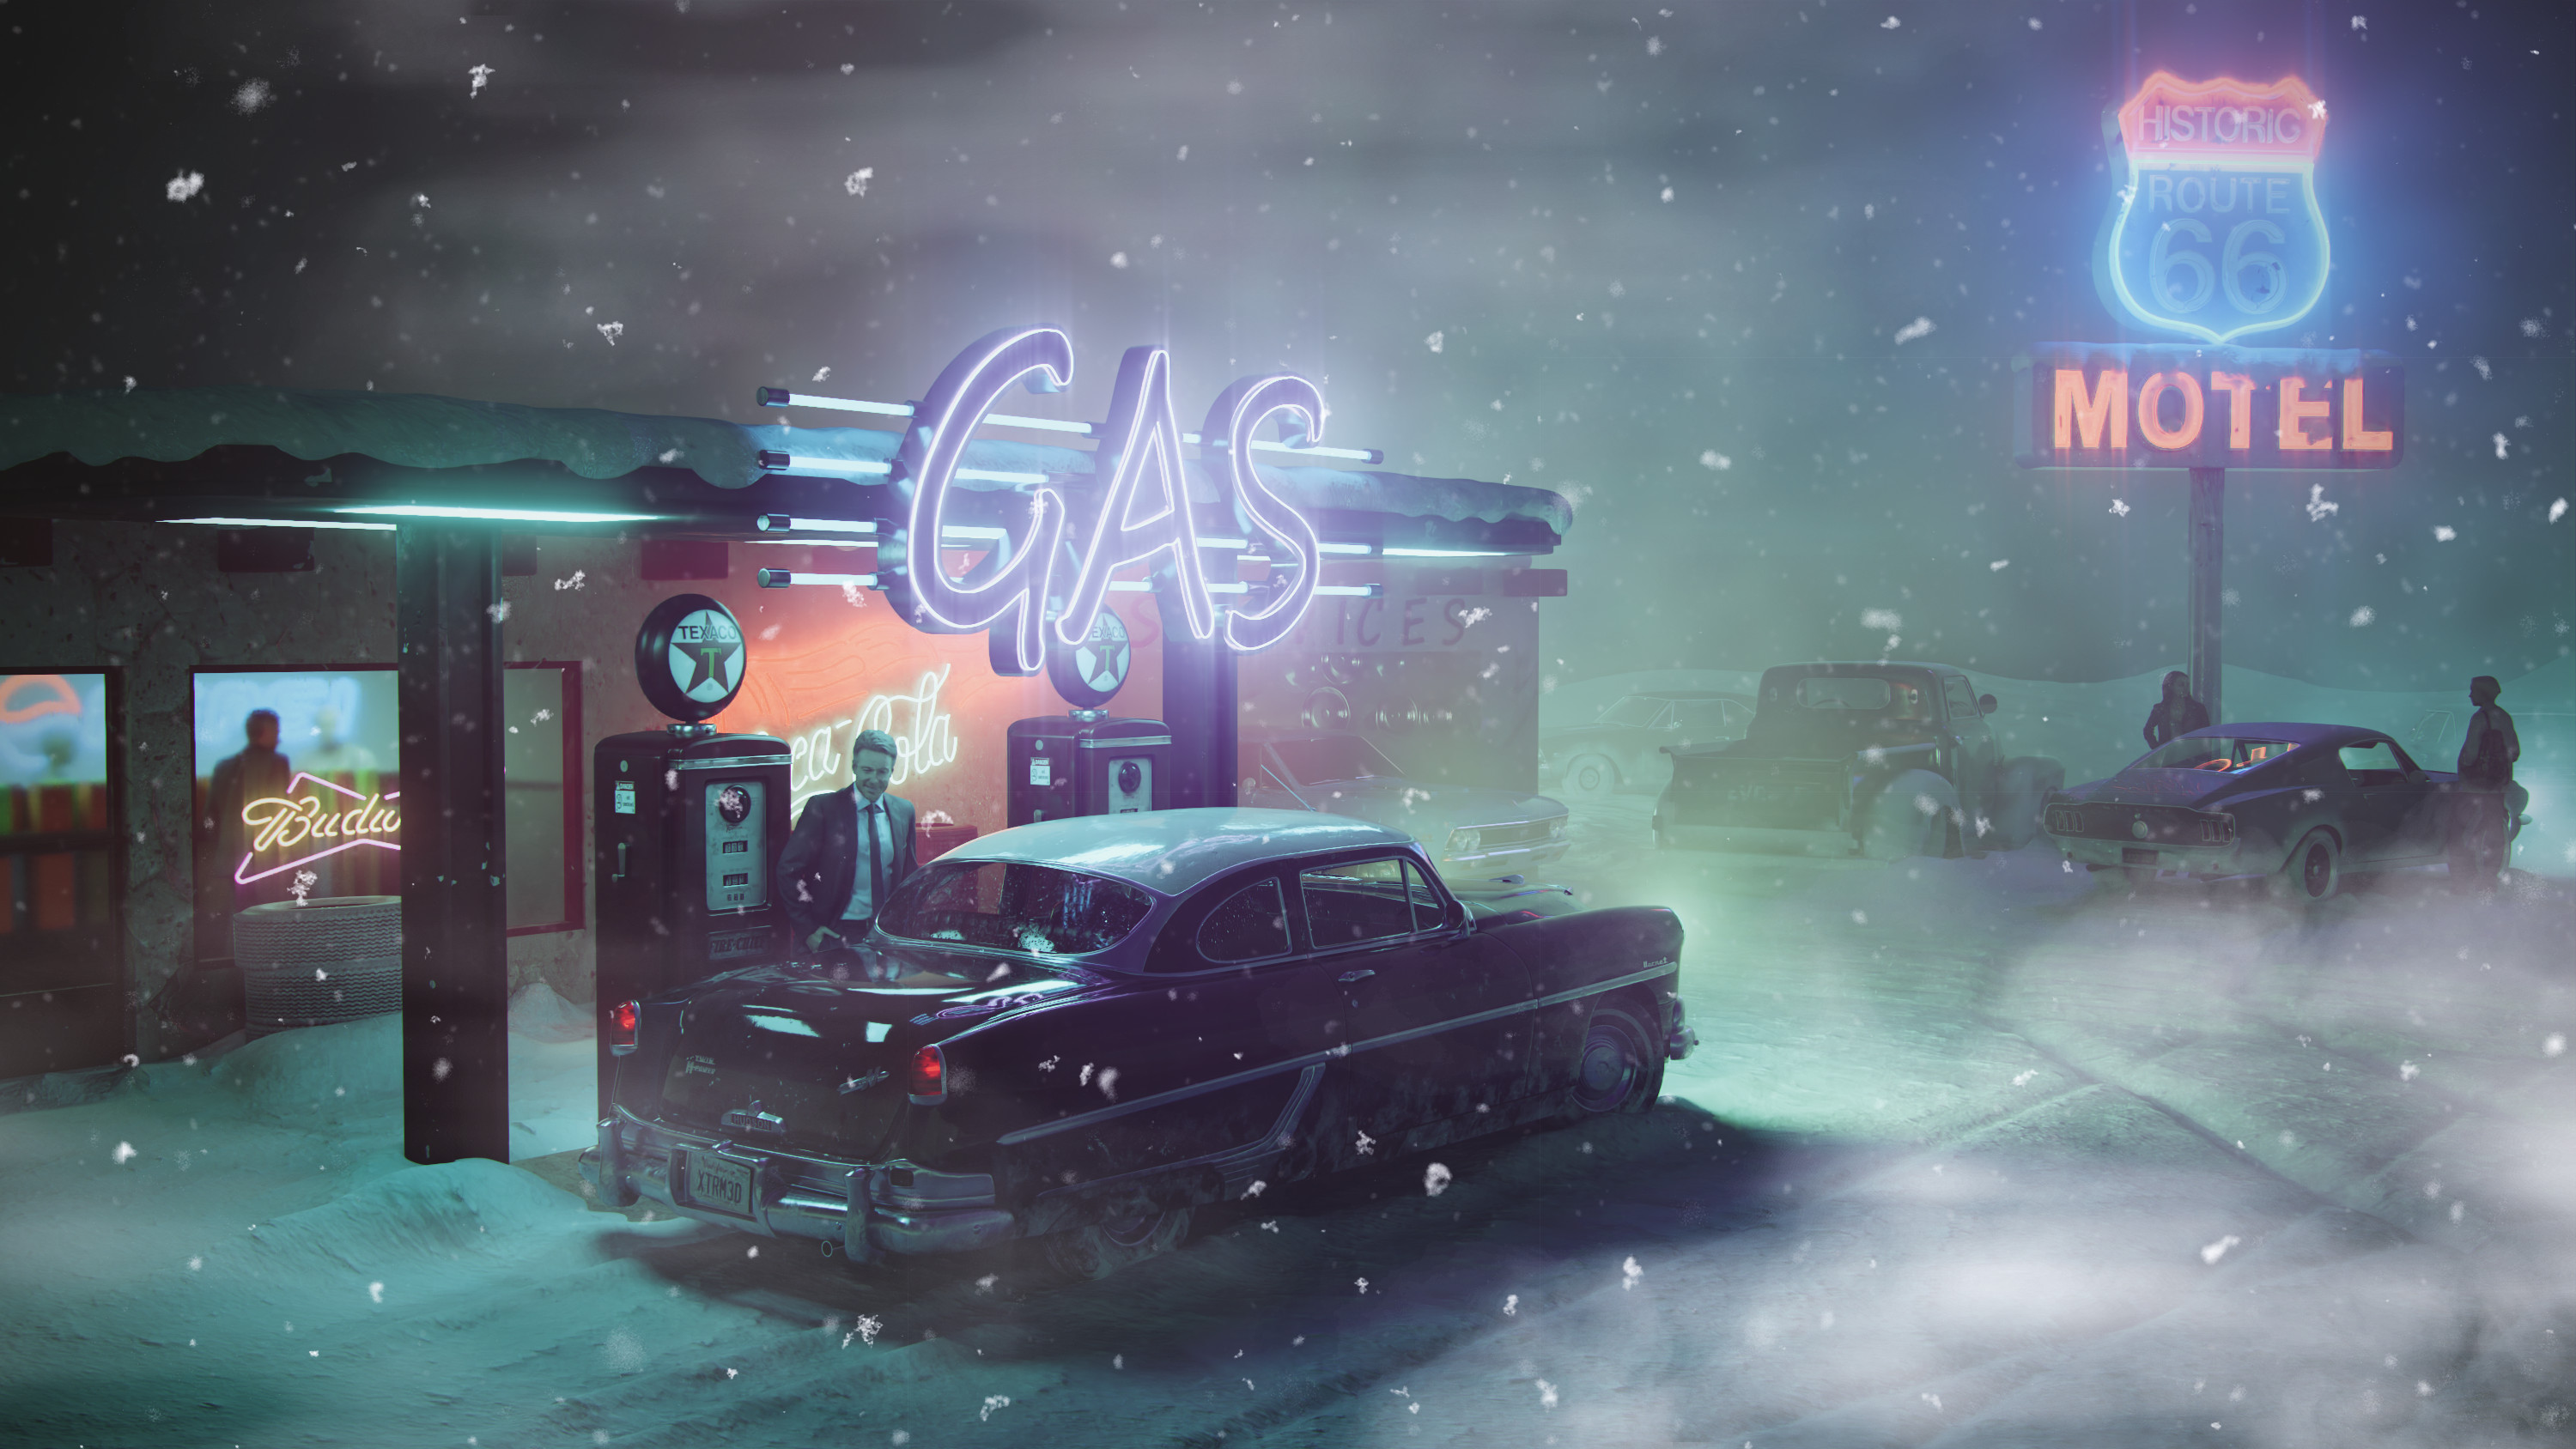 Winter Night Cold Men Car Artwork Vehicle Gas Station Motel Route 66 Snow Flakes 3000x1688